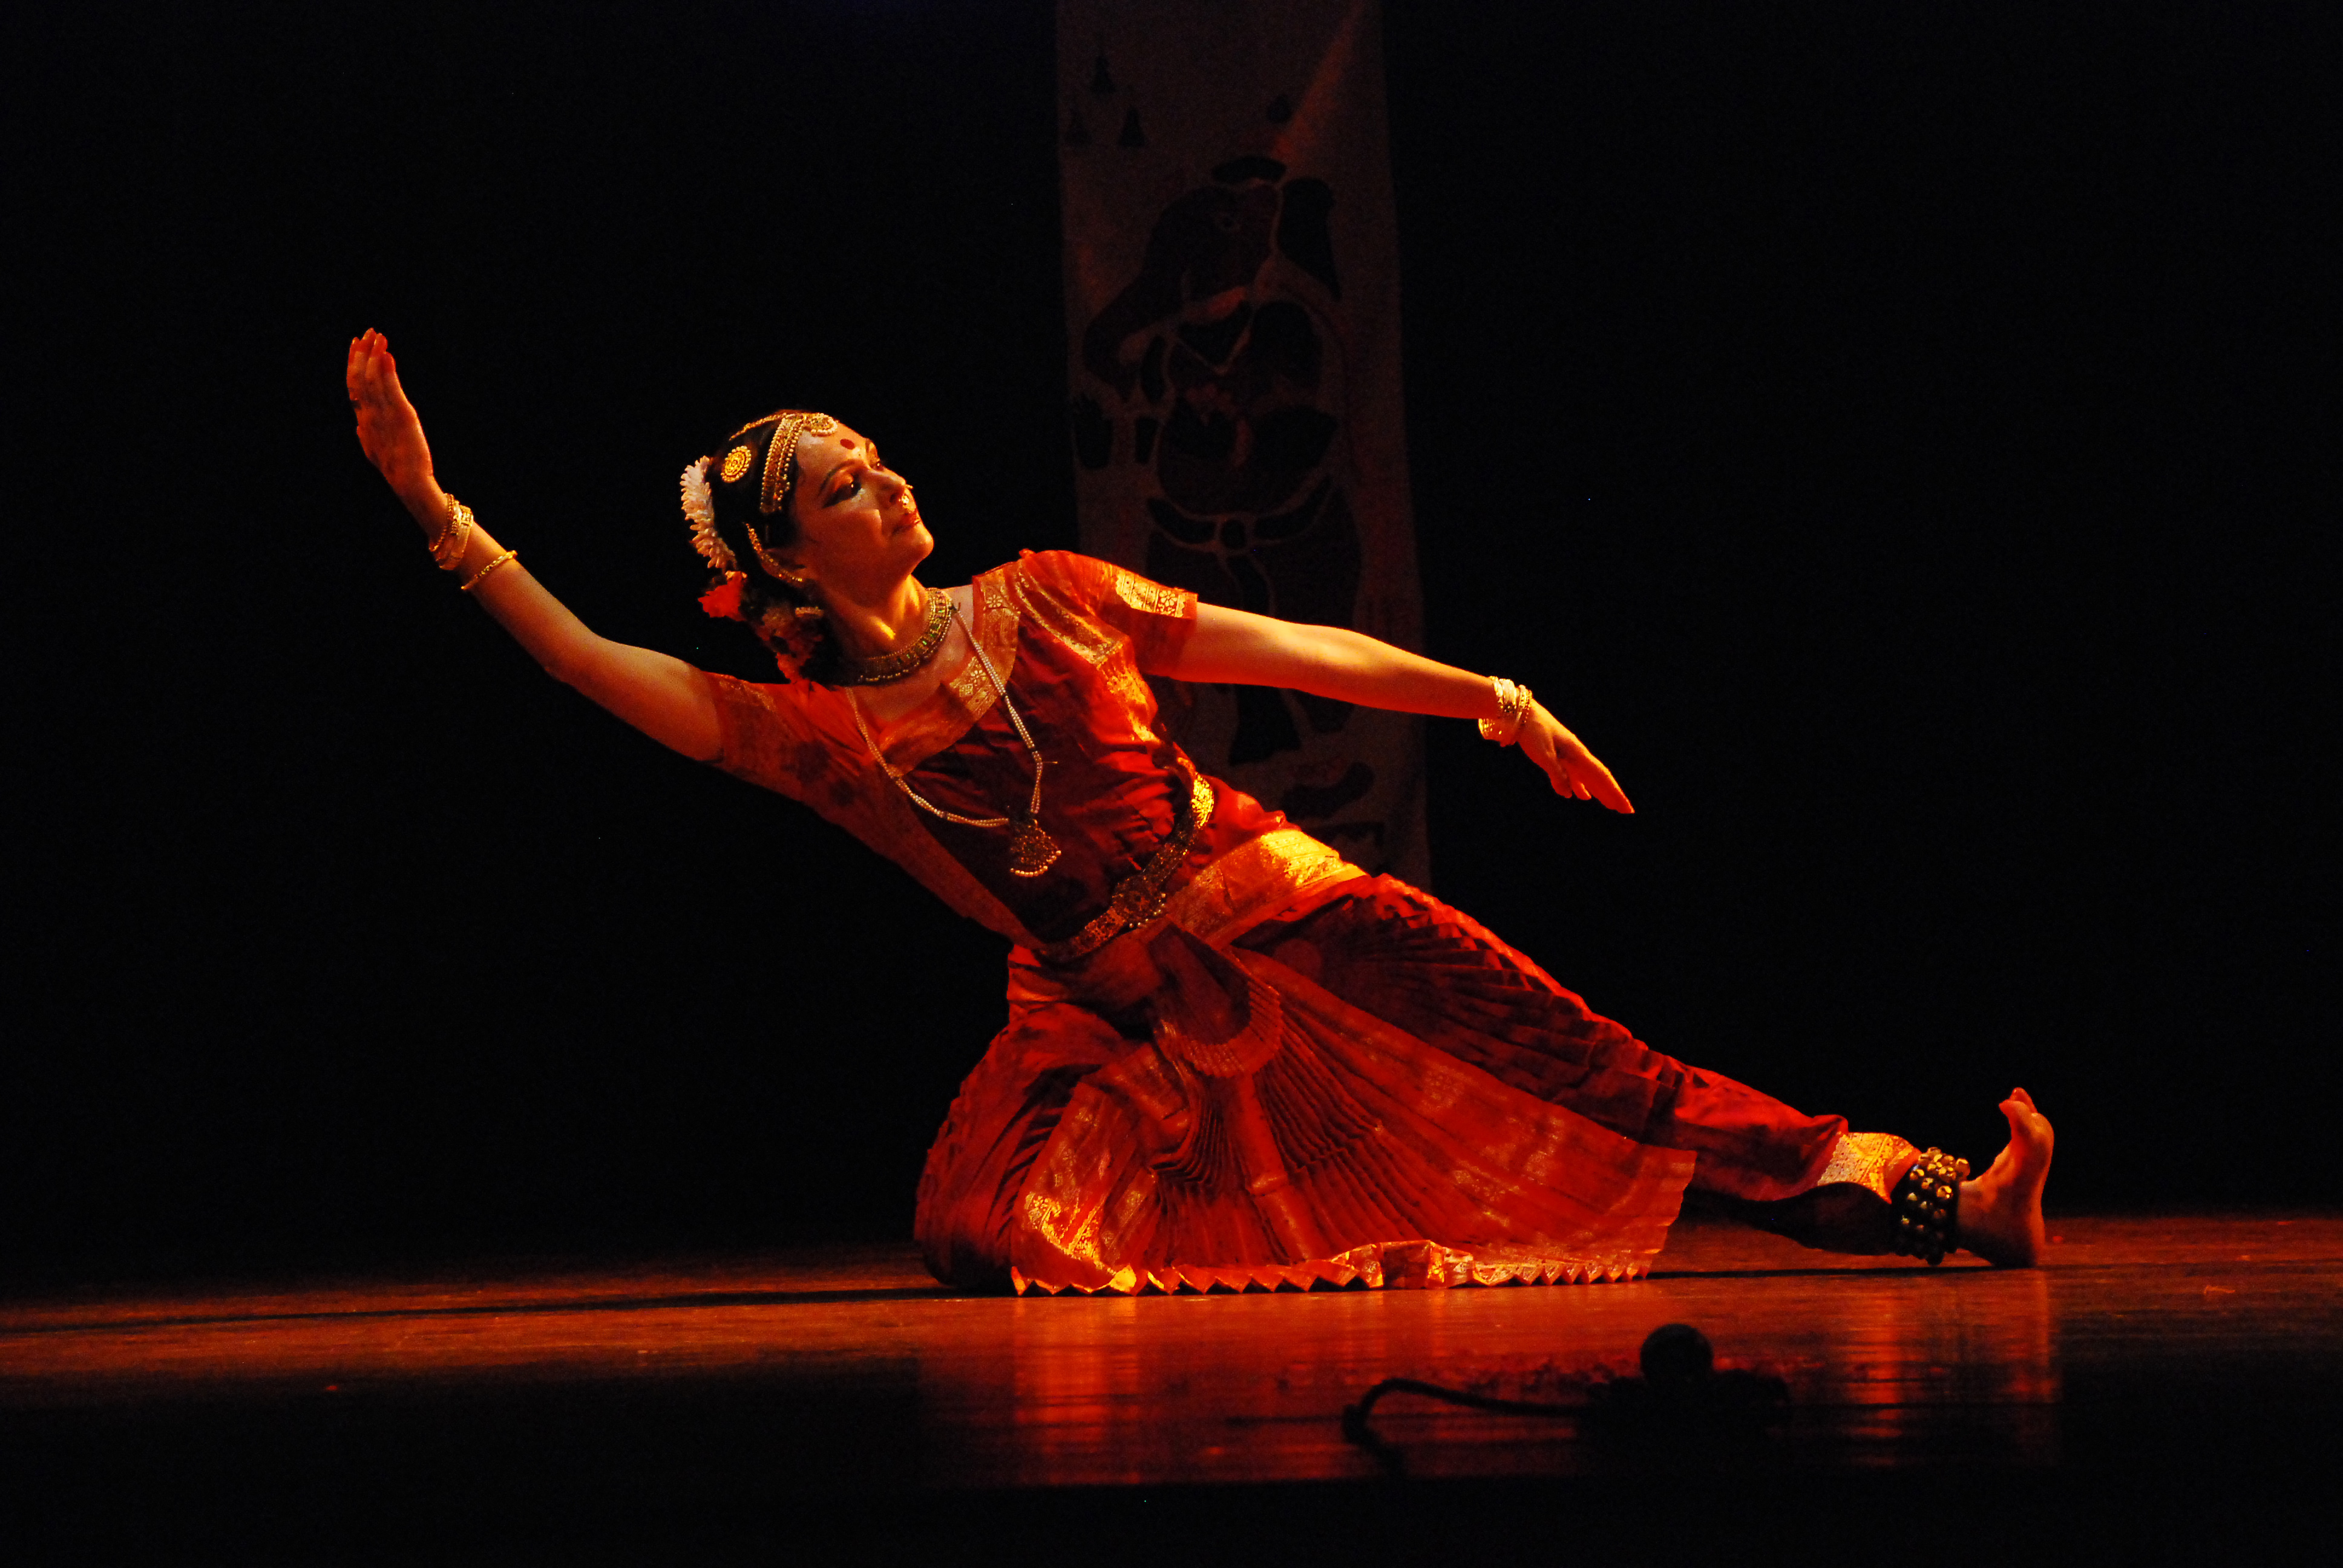 The live, one-on-one, real time, interactive online 
				Bharatanatyam dance class lessons are conducted through Skype, Google Meet, Duo, Zoom & these online dance classes are available to learn all the major 
				Bharatanatyam dance styles – Kalakshetra, Pandanallur Thanjavur, Mellatur, Kalamandalam & Vazhuvoor schools of 
				Bharathanatyam Adavus dancing.